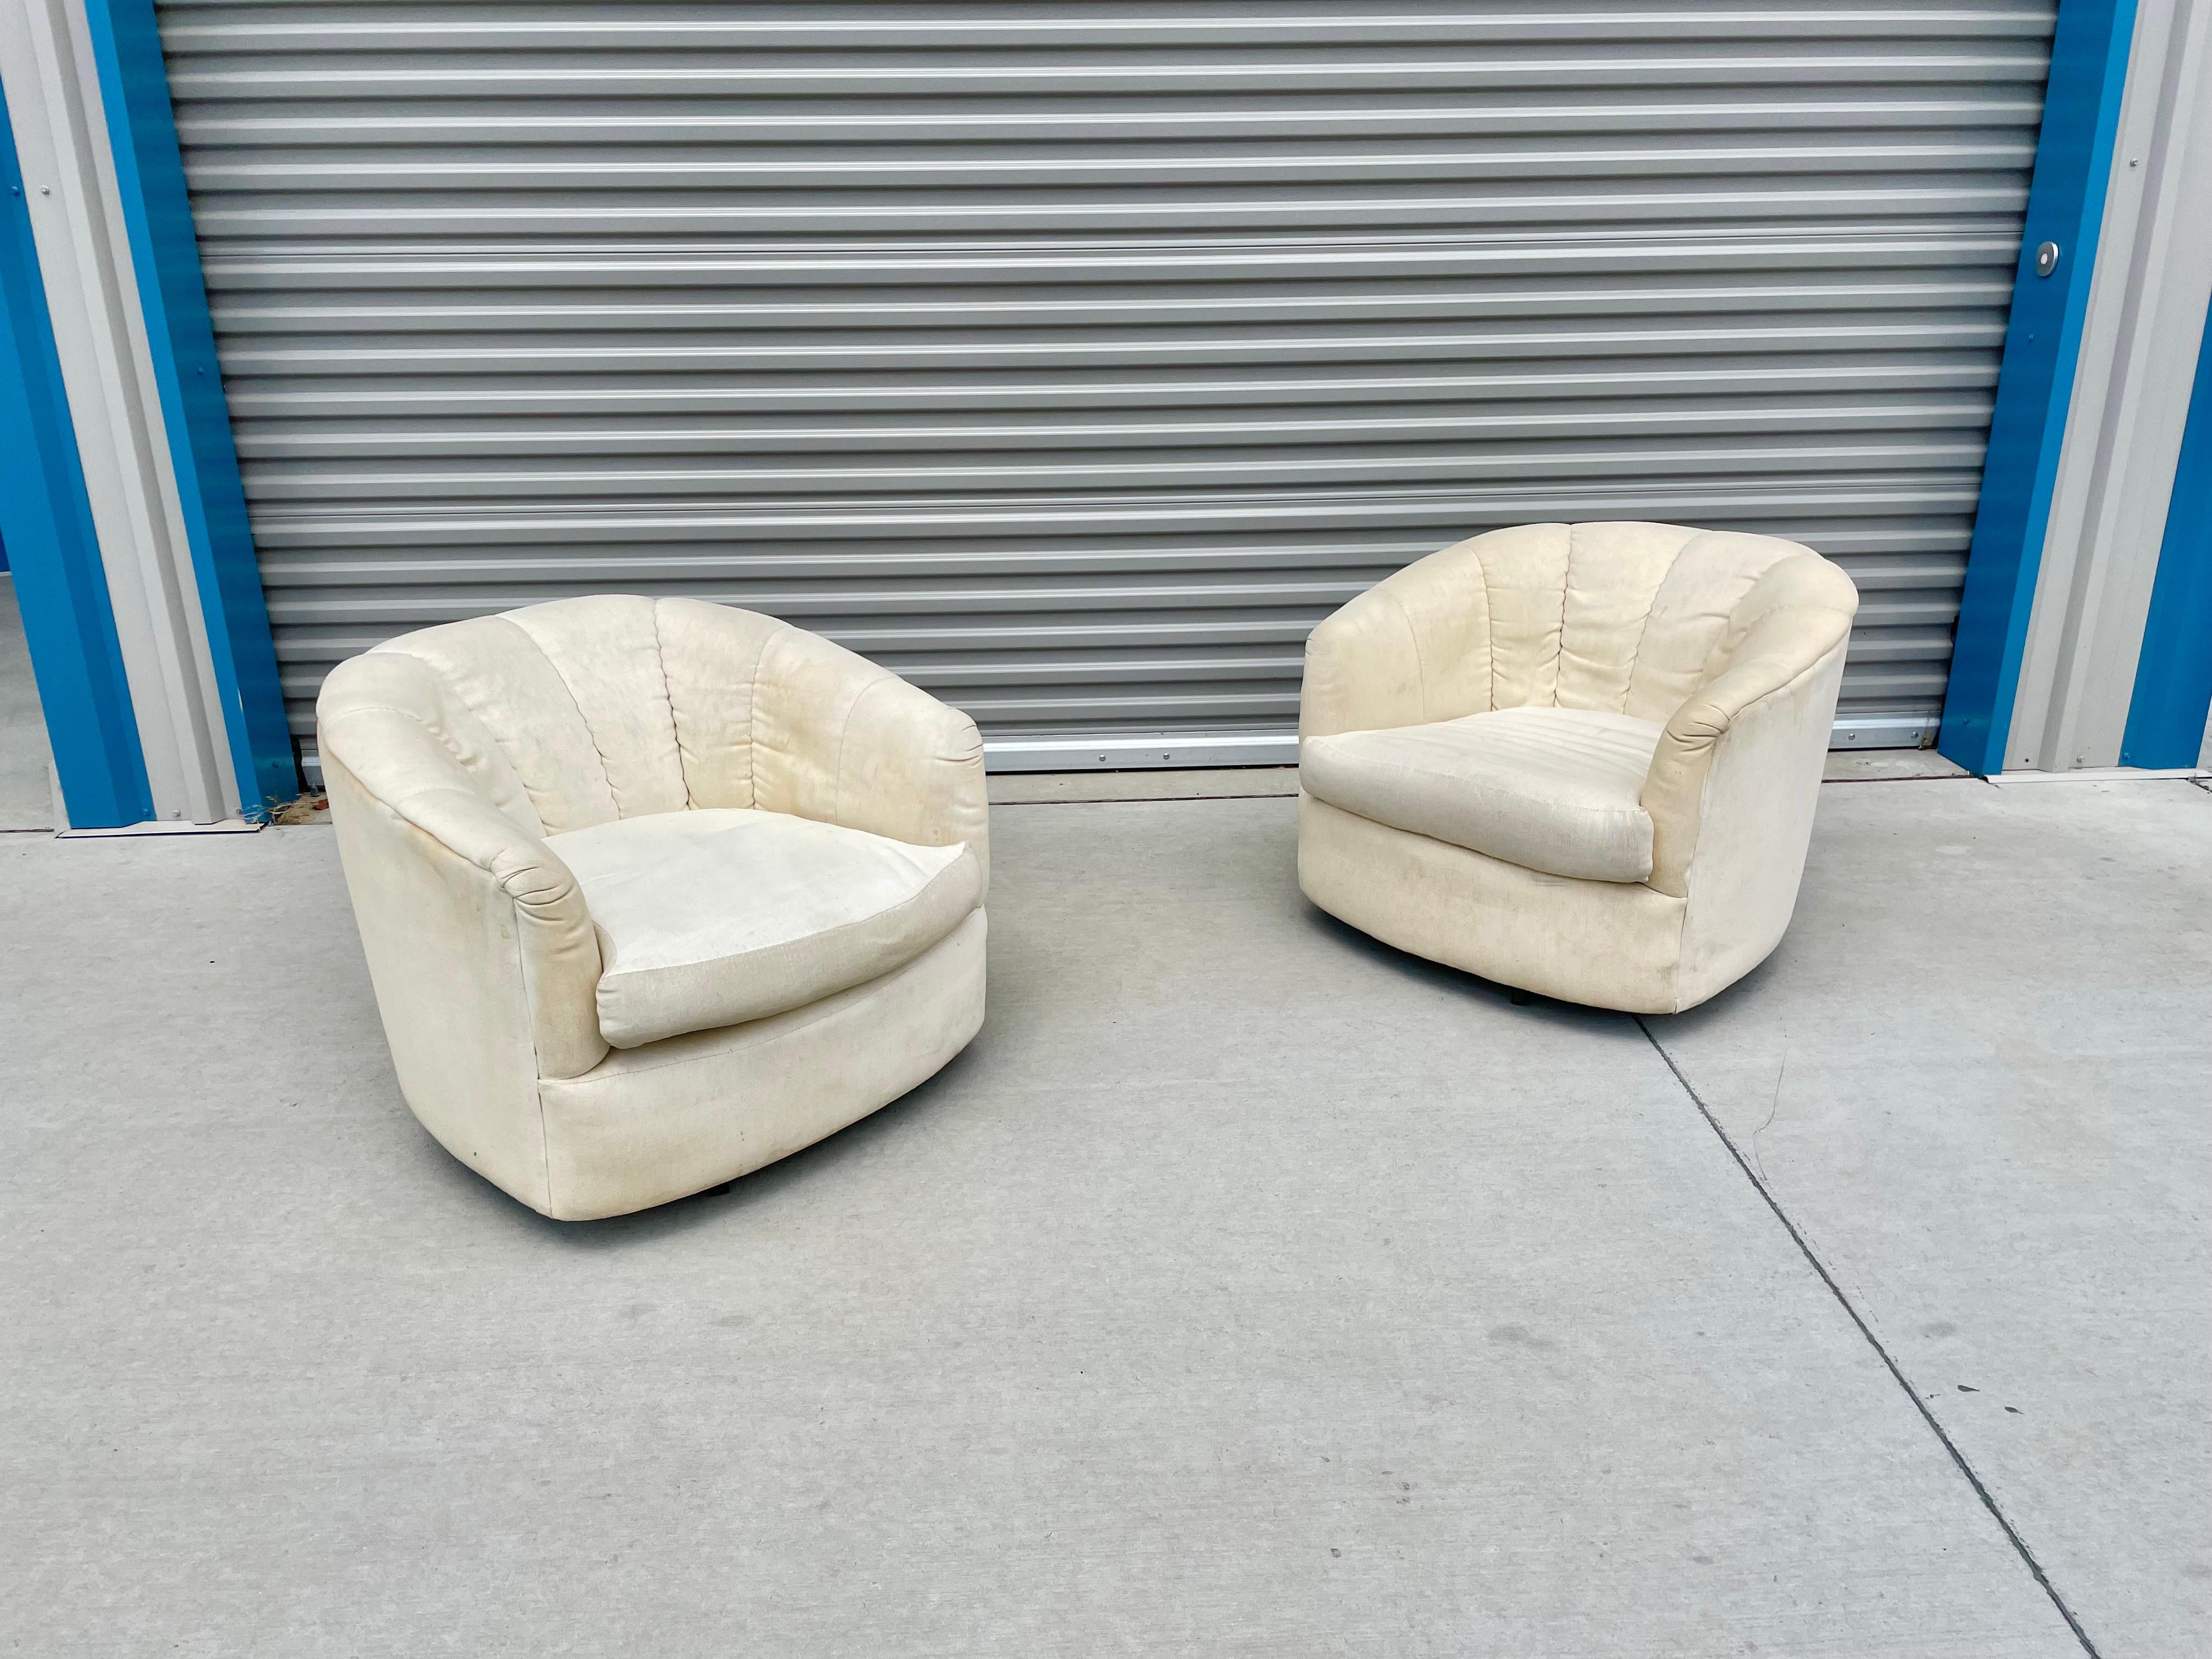 American Midcentury Barrel Chairs Styled After Milo Baughman For Sale